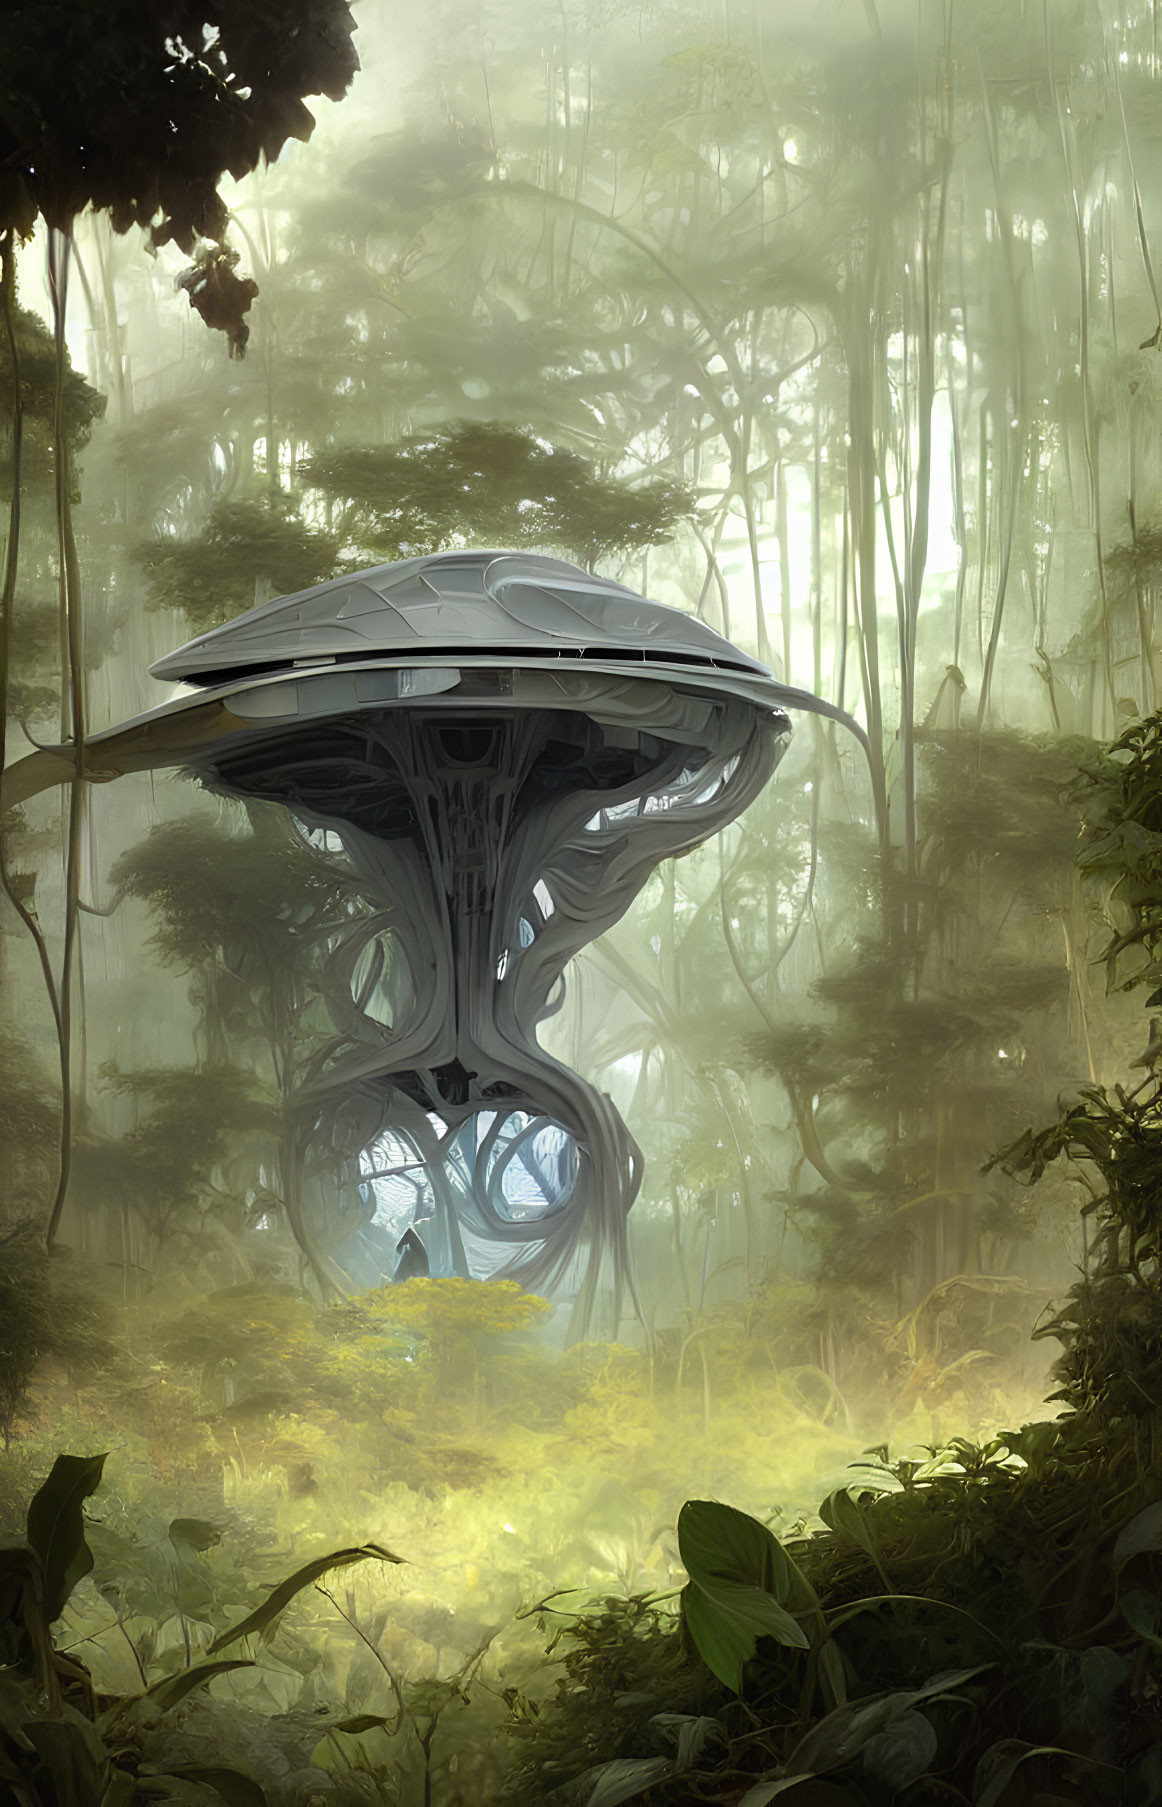 Futuristic treehouse in misty forest with ethereal light.